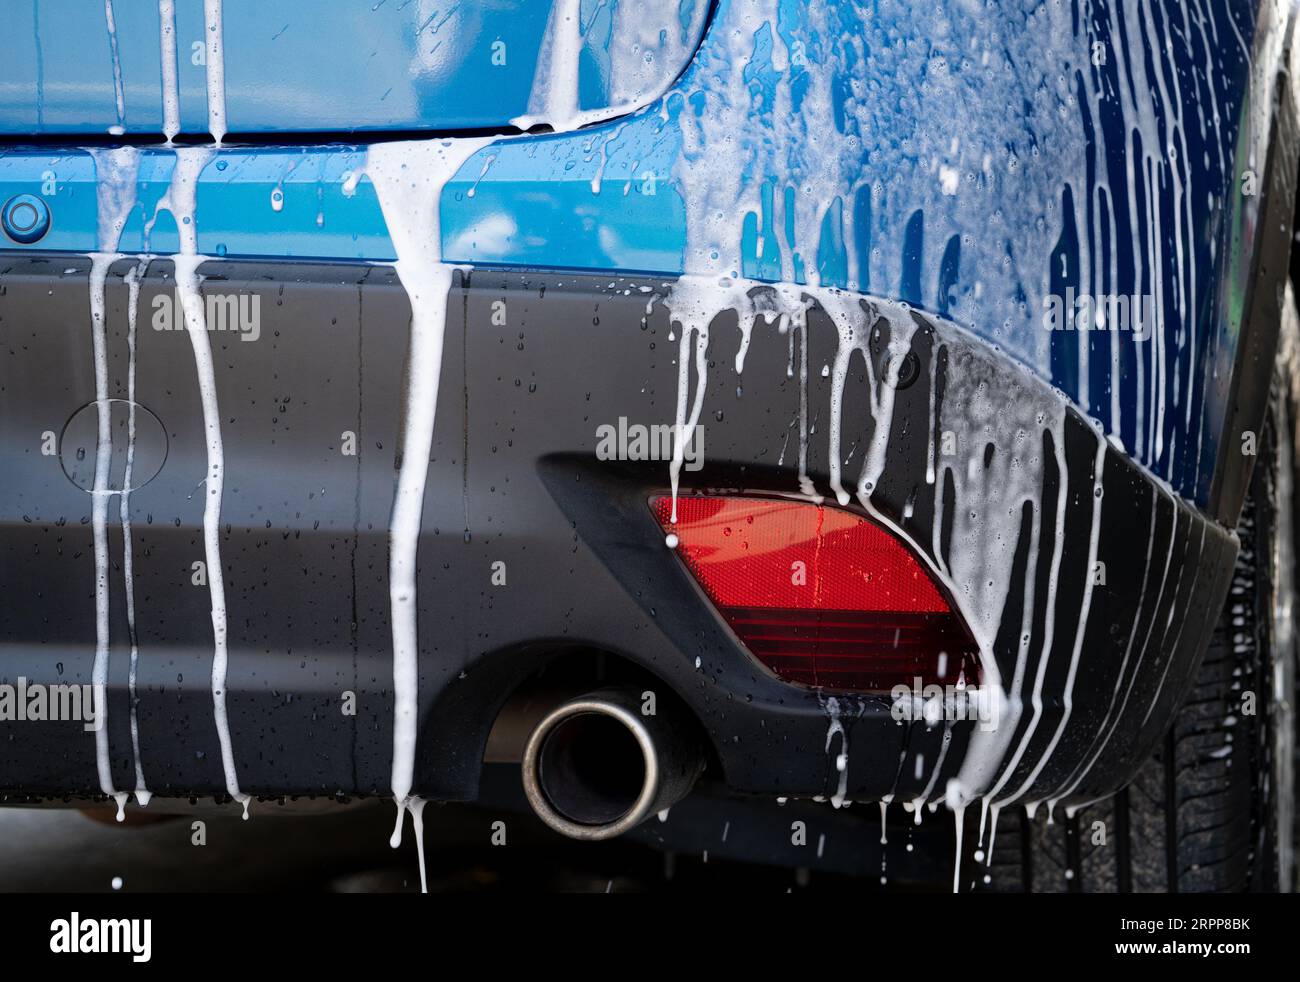 Car Detailer Washing Auto with Soap Stock Image - Image of